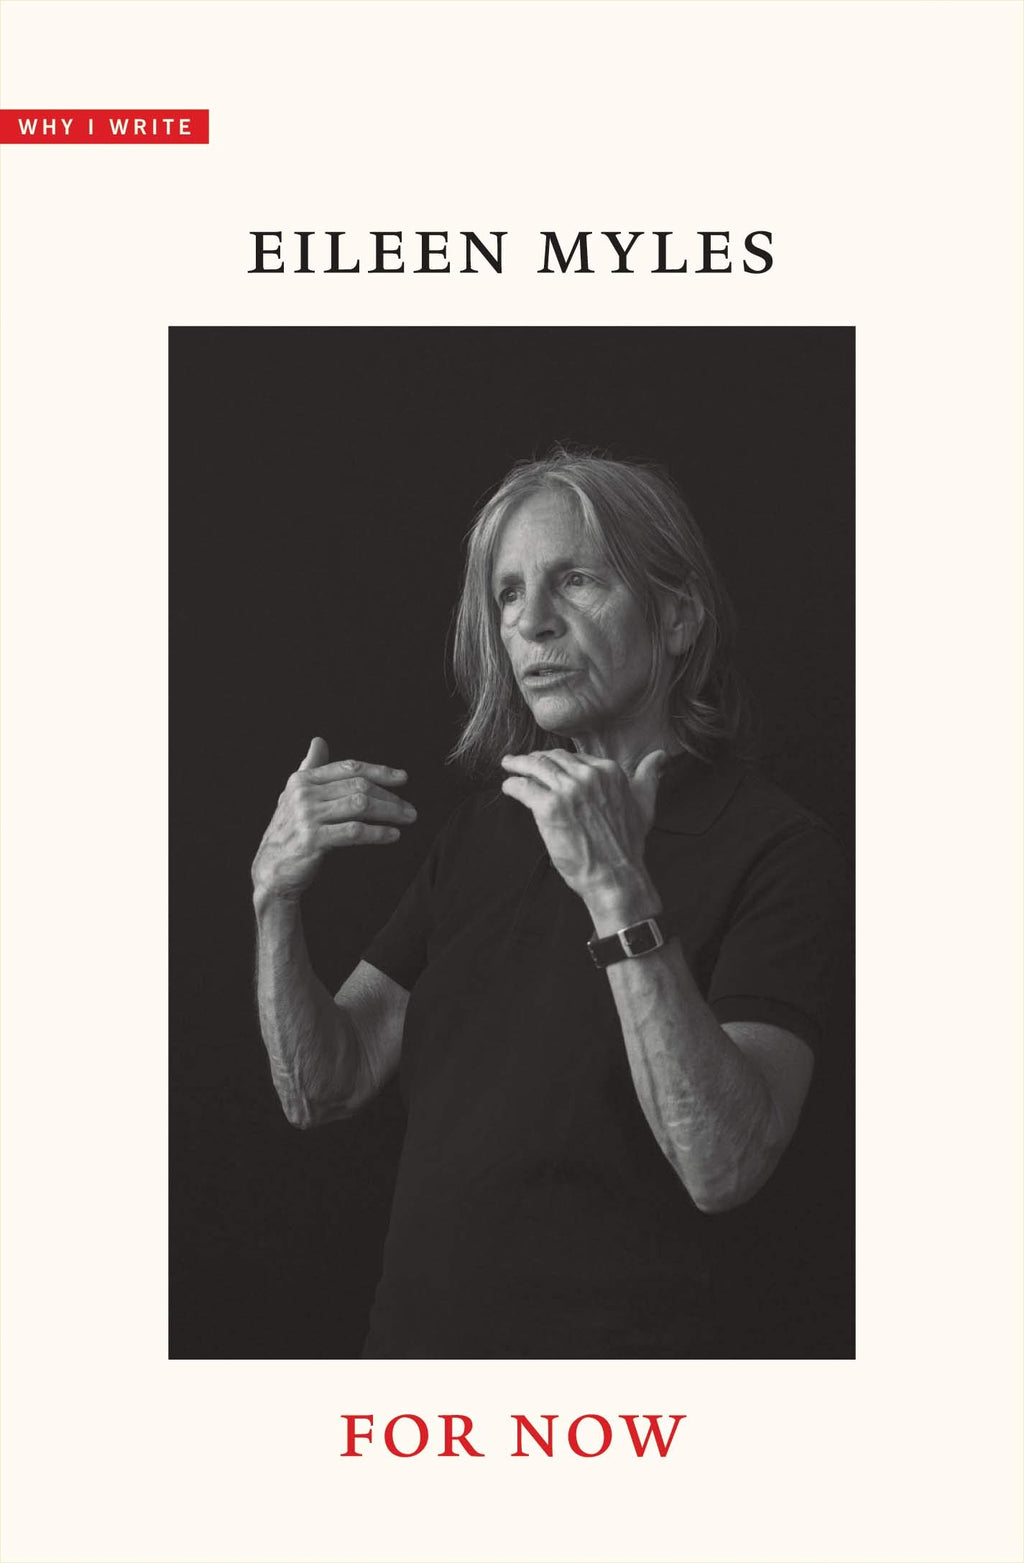 For Now (Why I Write) by Eileen Myles